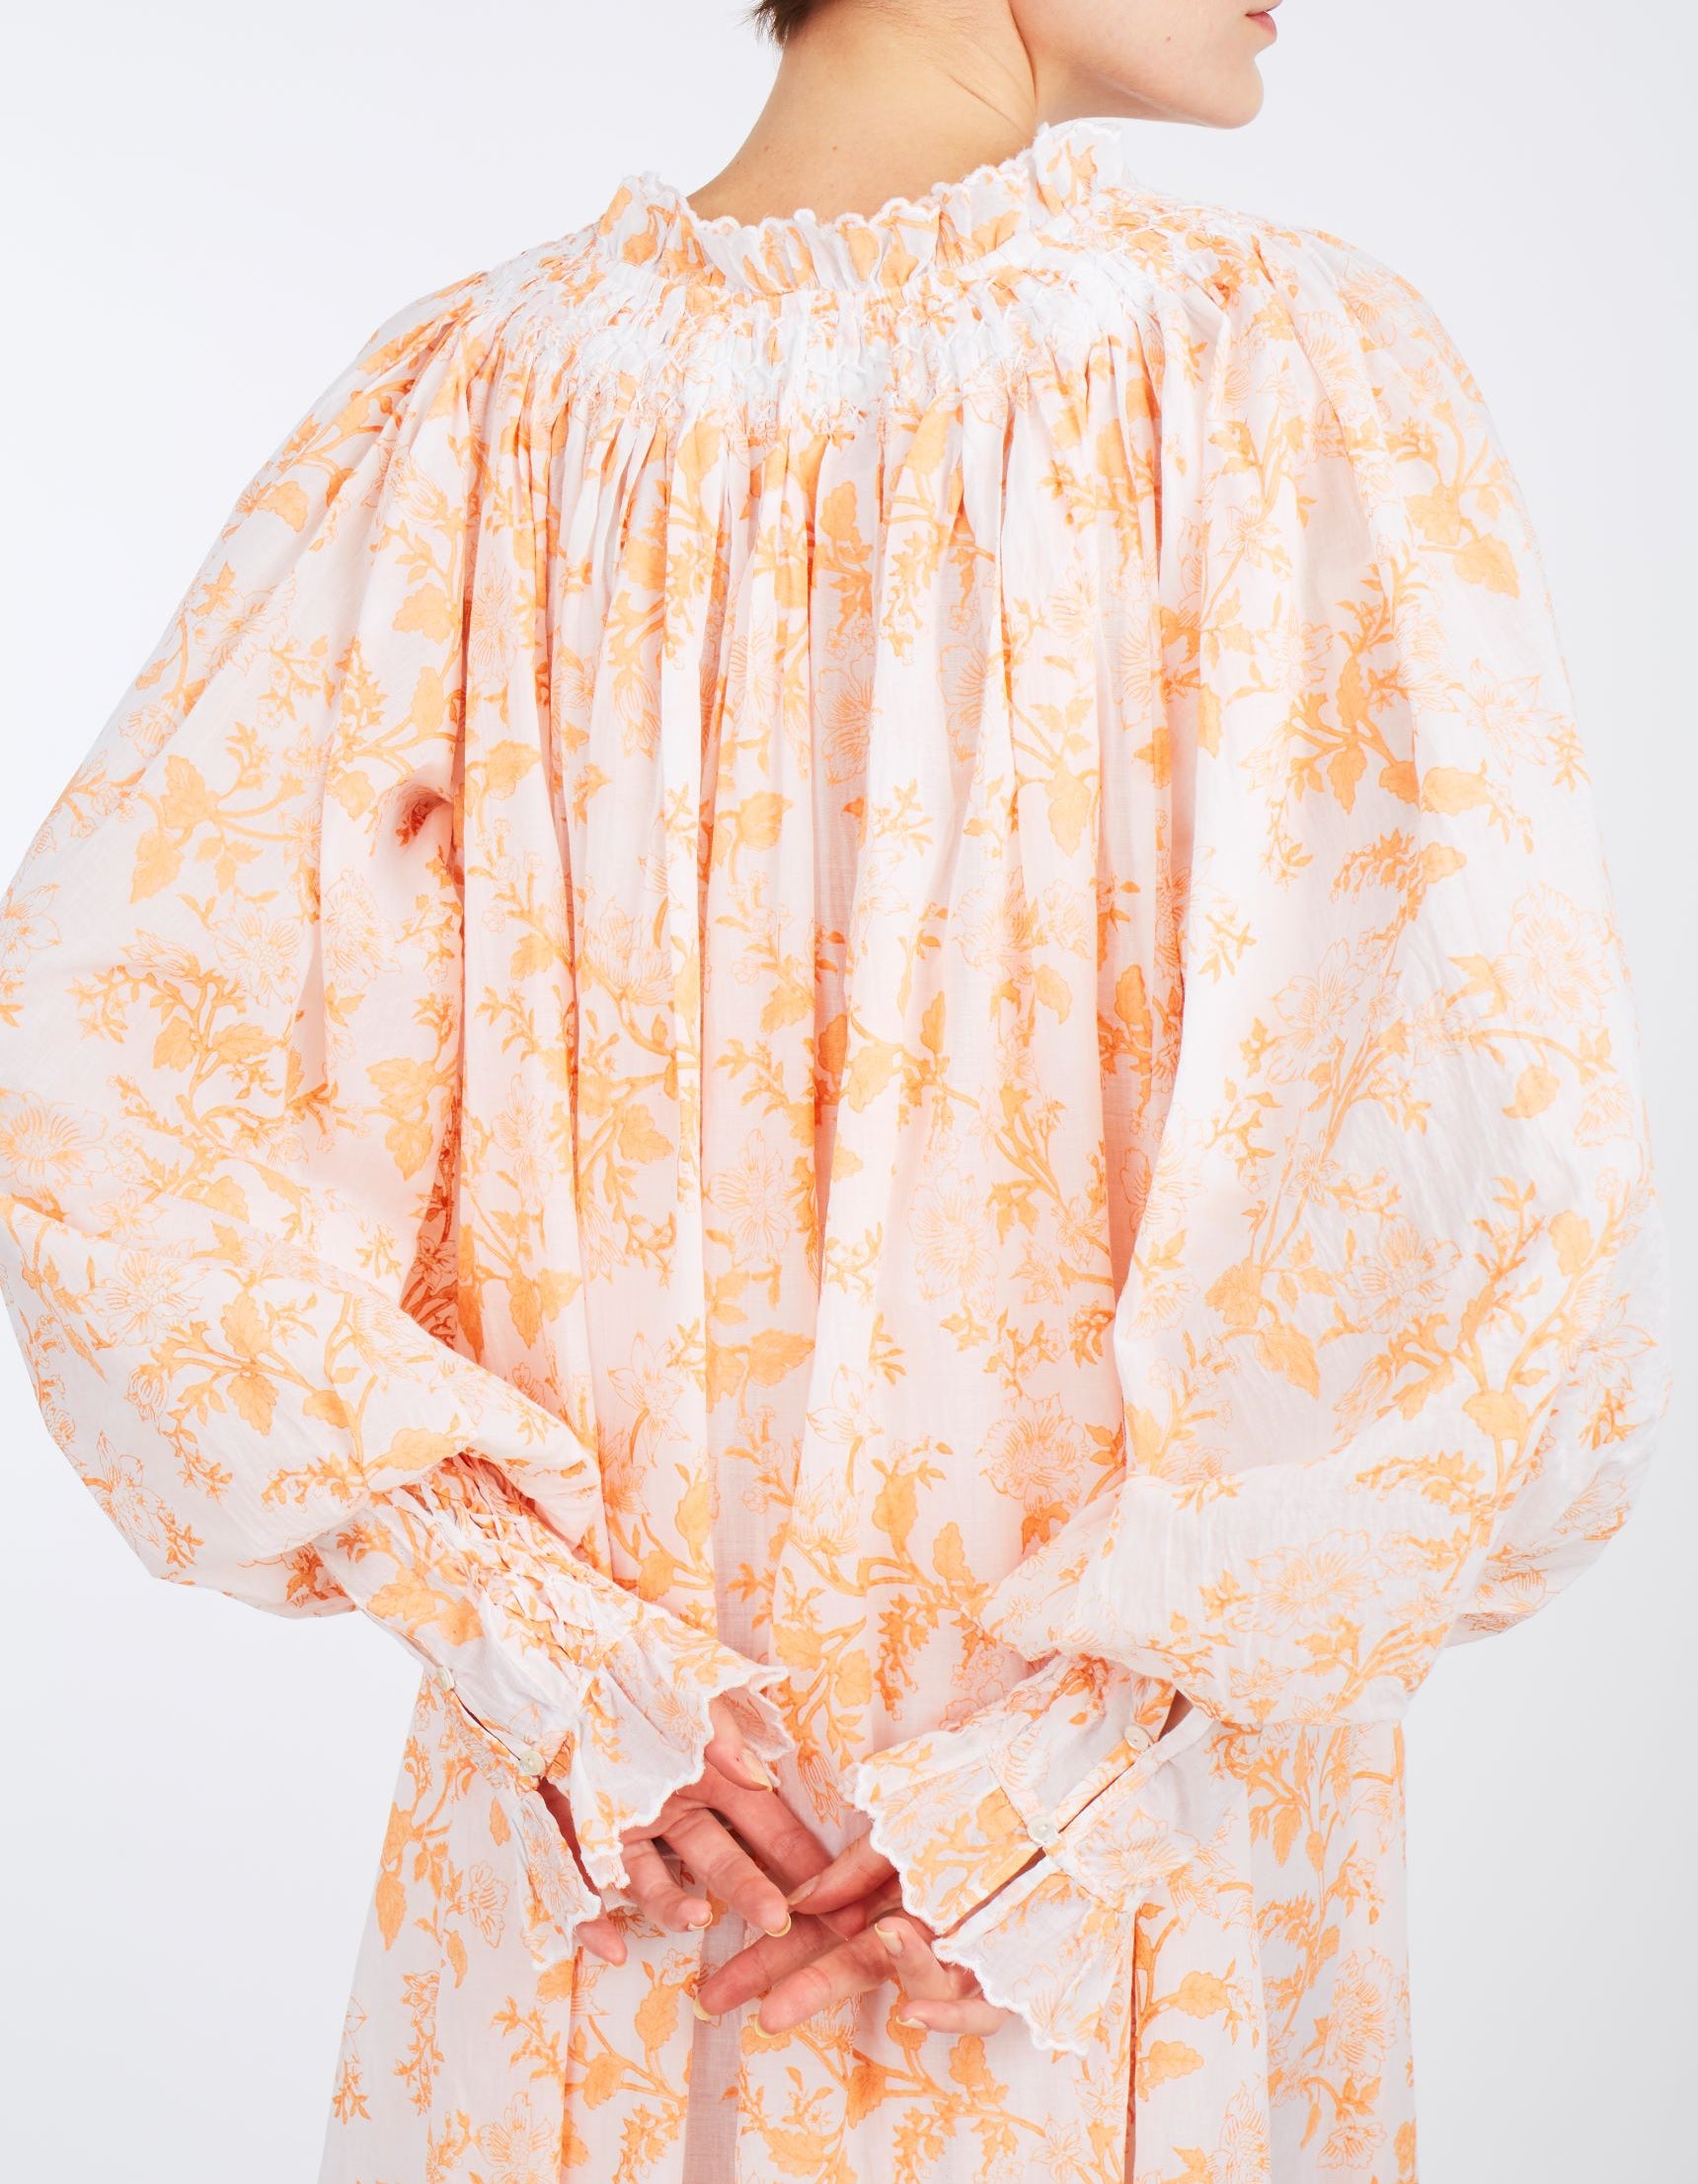 Back detail of Vladia Chintz Apricot Dress by Thierry Colson